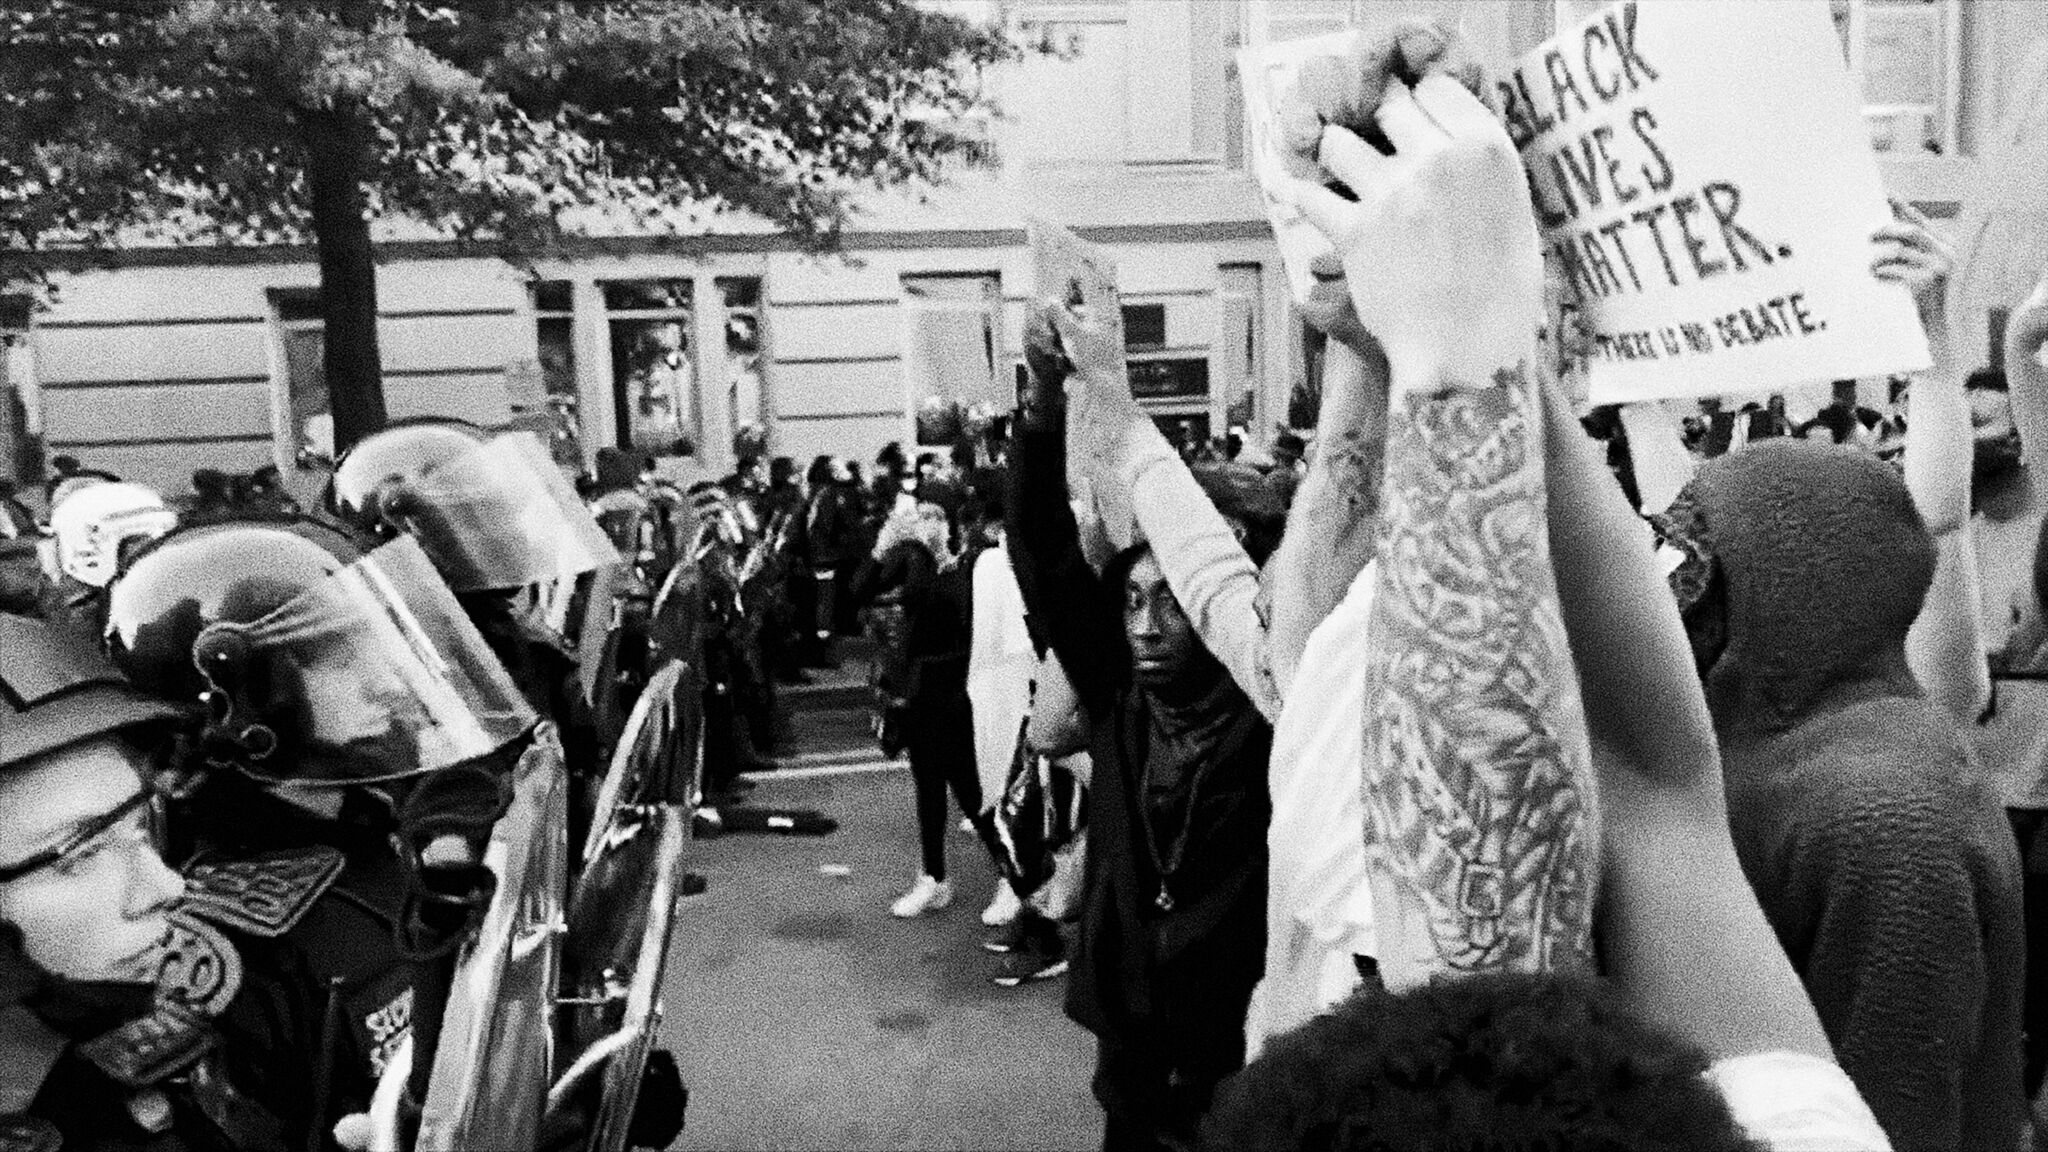 Black-and-white image of protesters holding up signs (one of which reads "Black Lives Matter. There is no debate.") facing off against a line of police officers wearing riot gear.